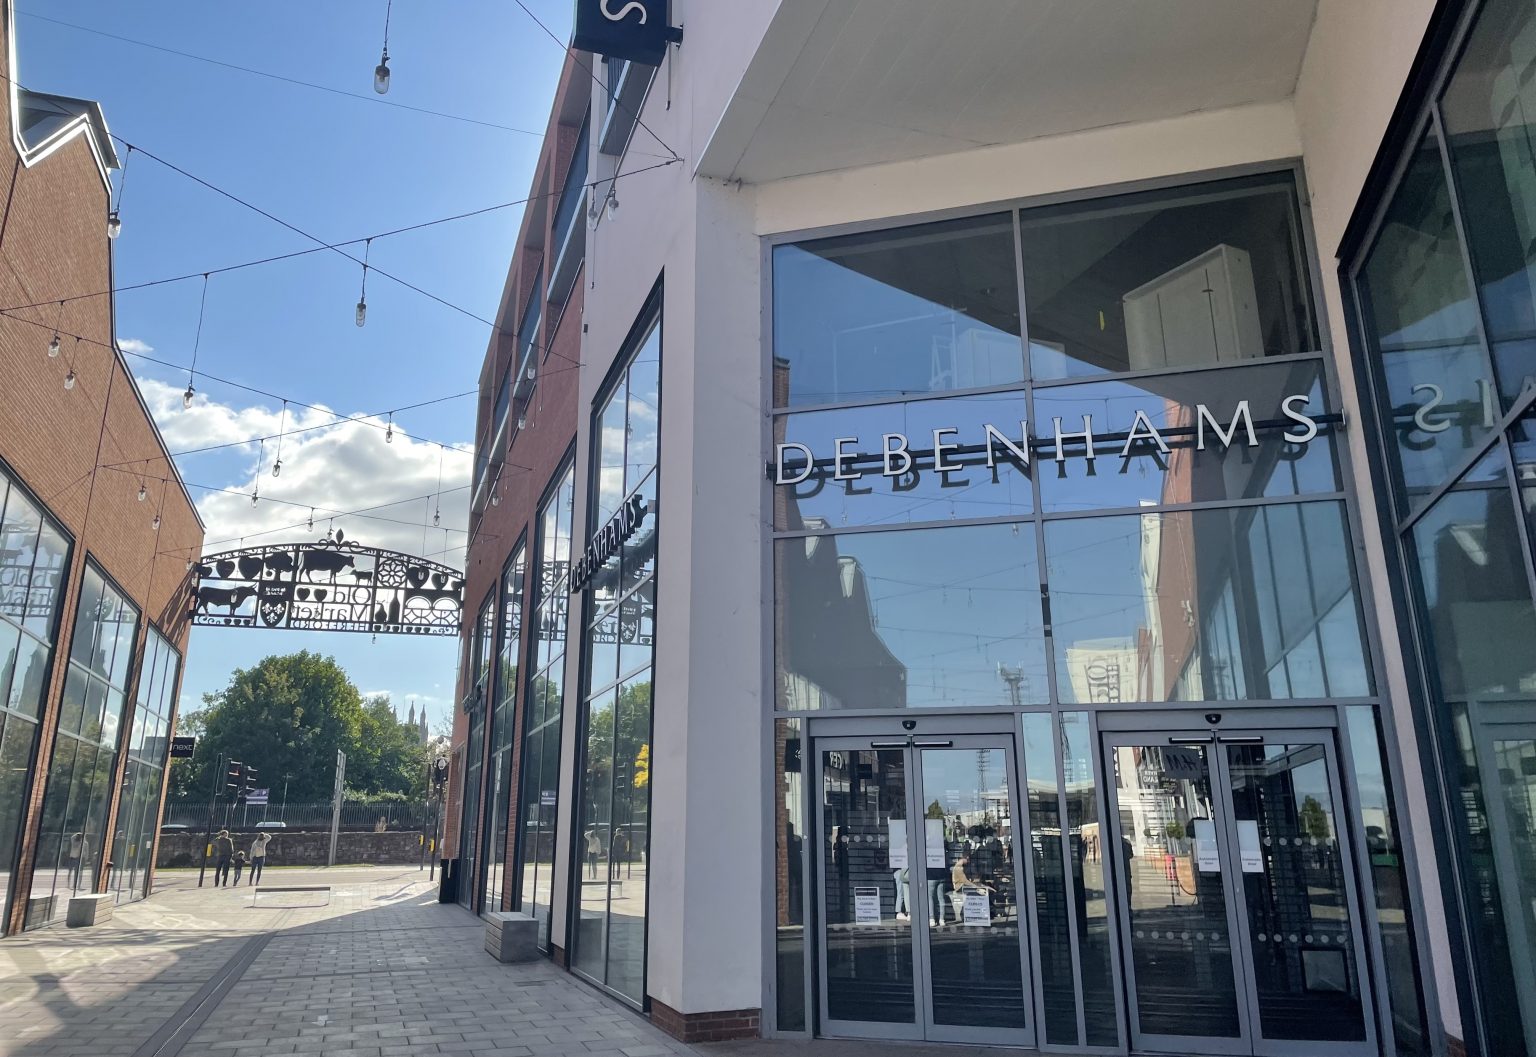 NEWS | Debenhams unit in Hereford is ‘under offer’ in major boost to local economy